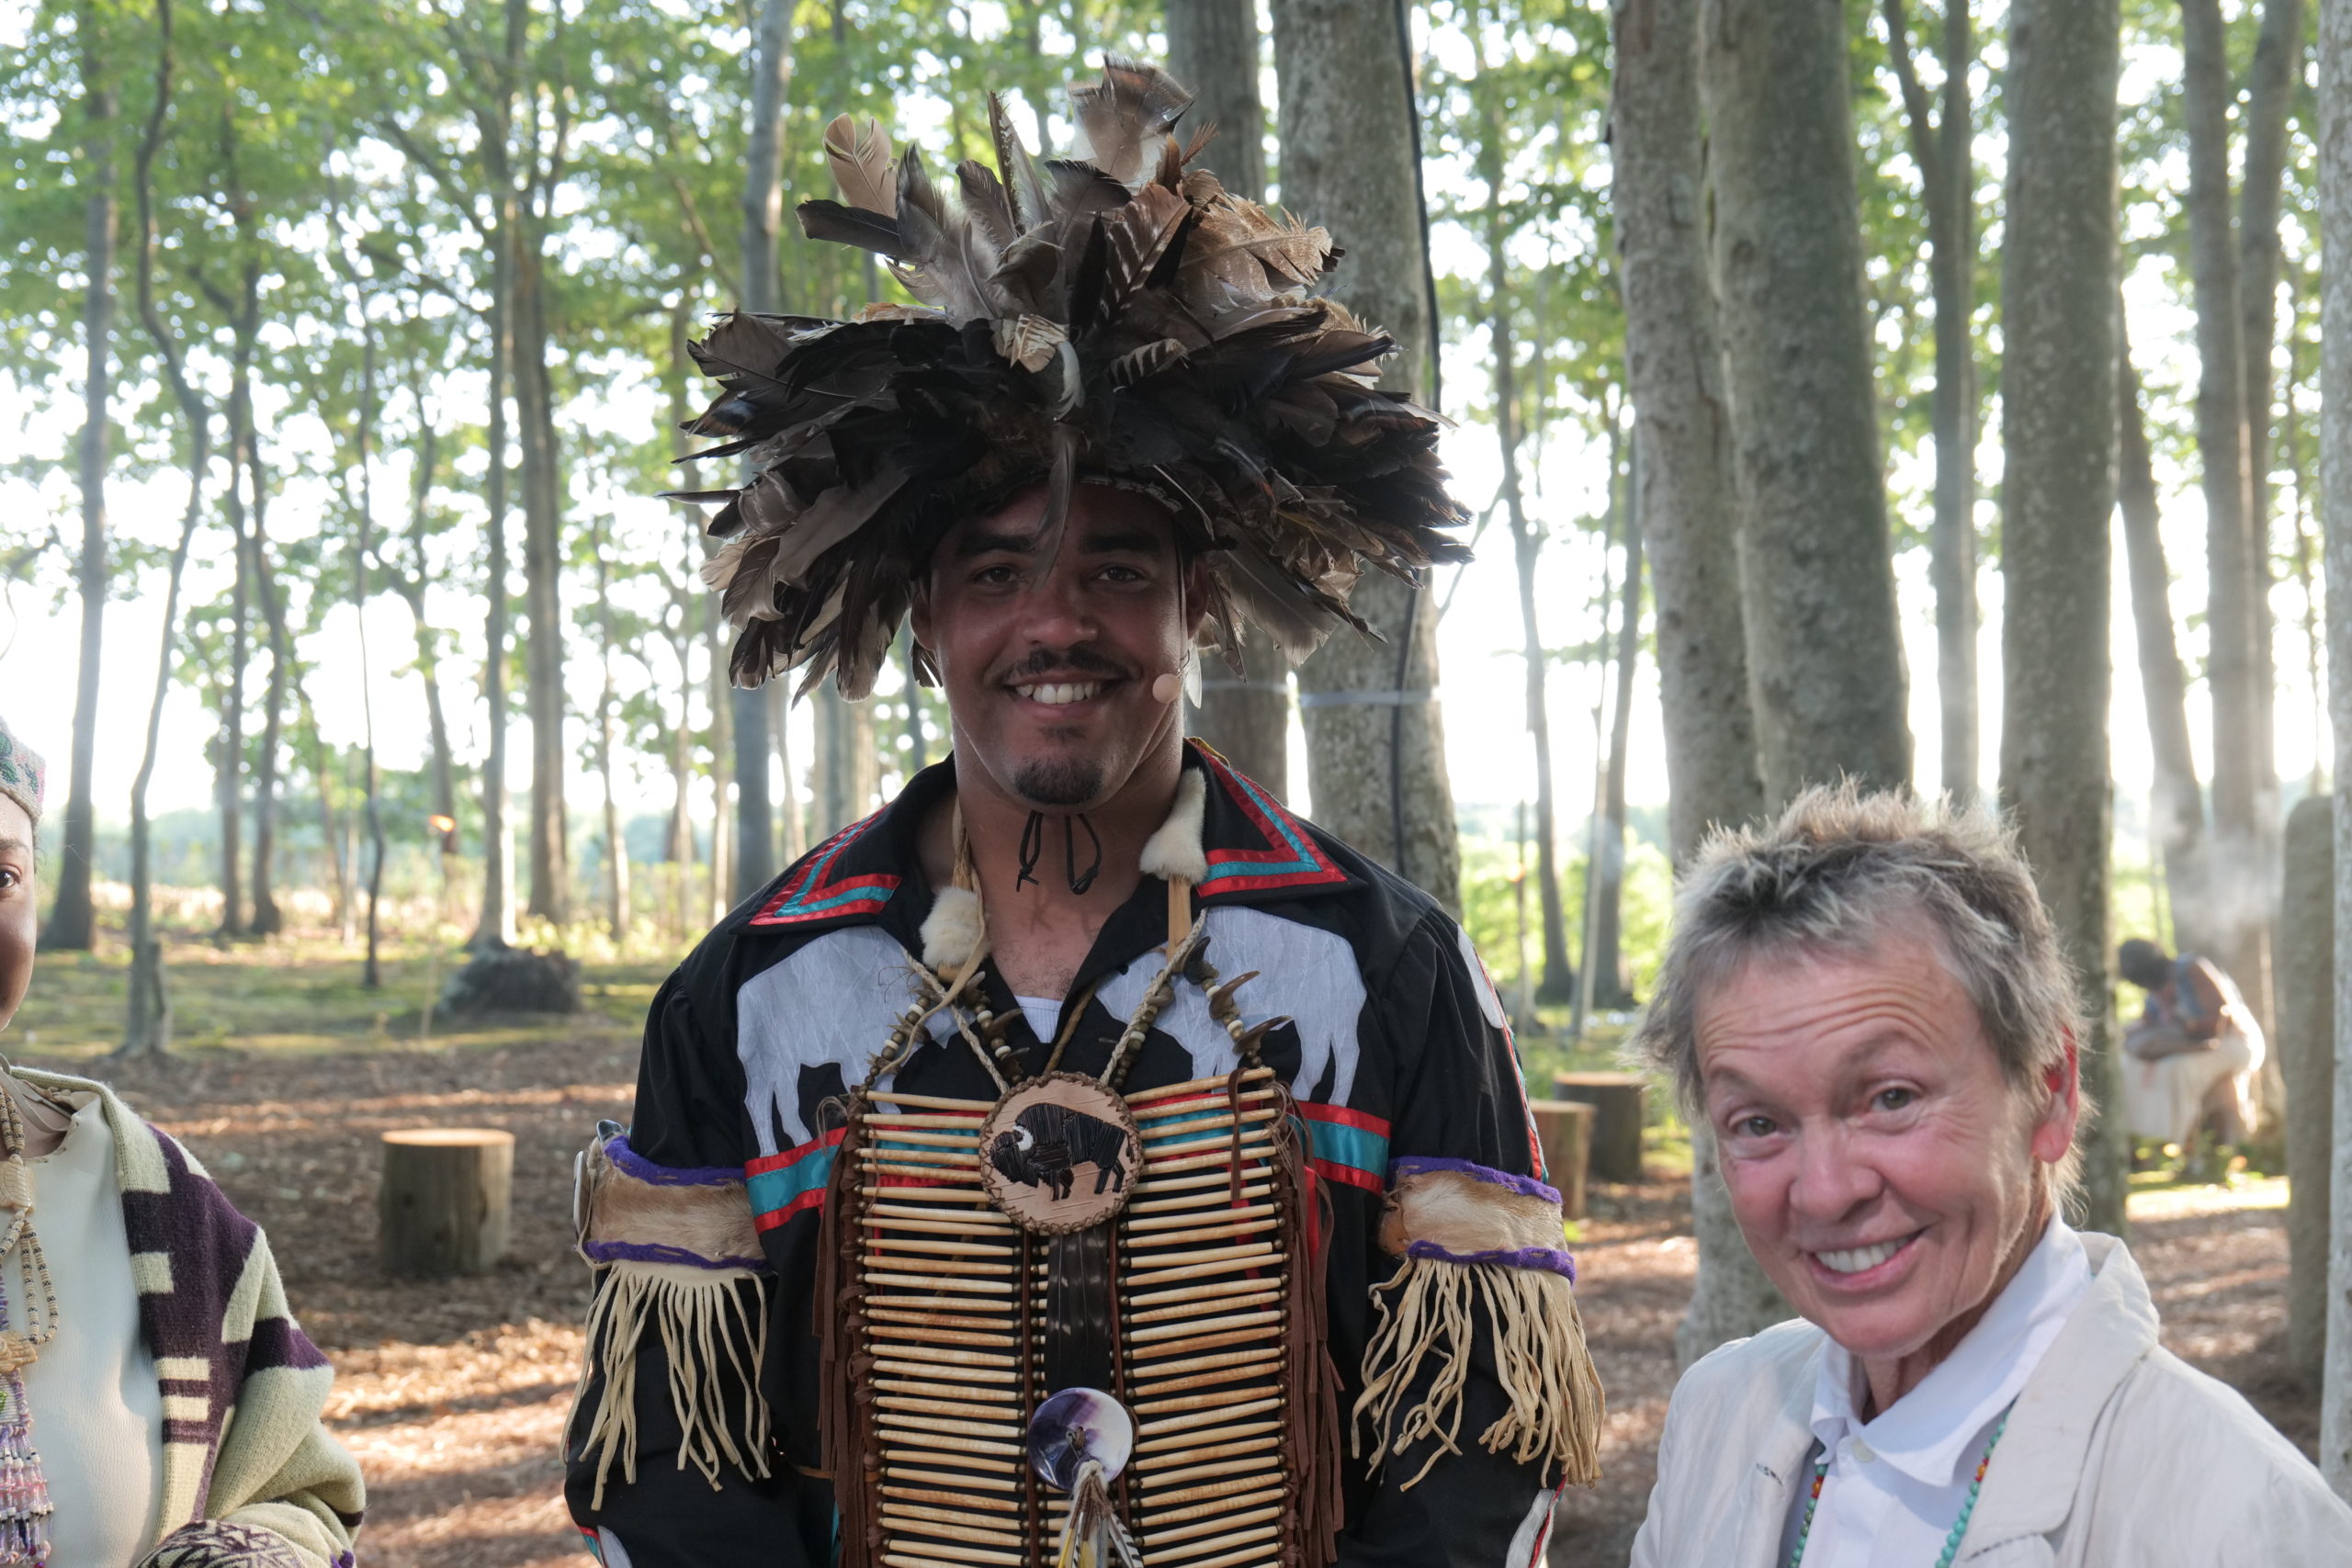 Shane Weeks, of the Shinnecock nation, and artist Laurie Anderson.